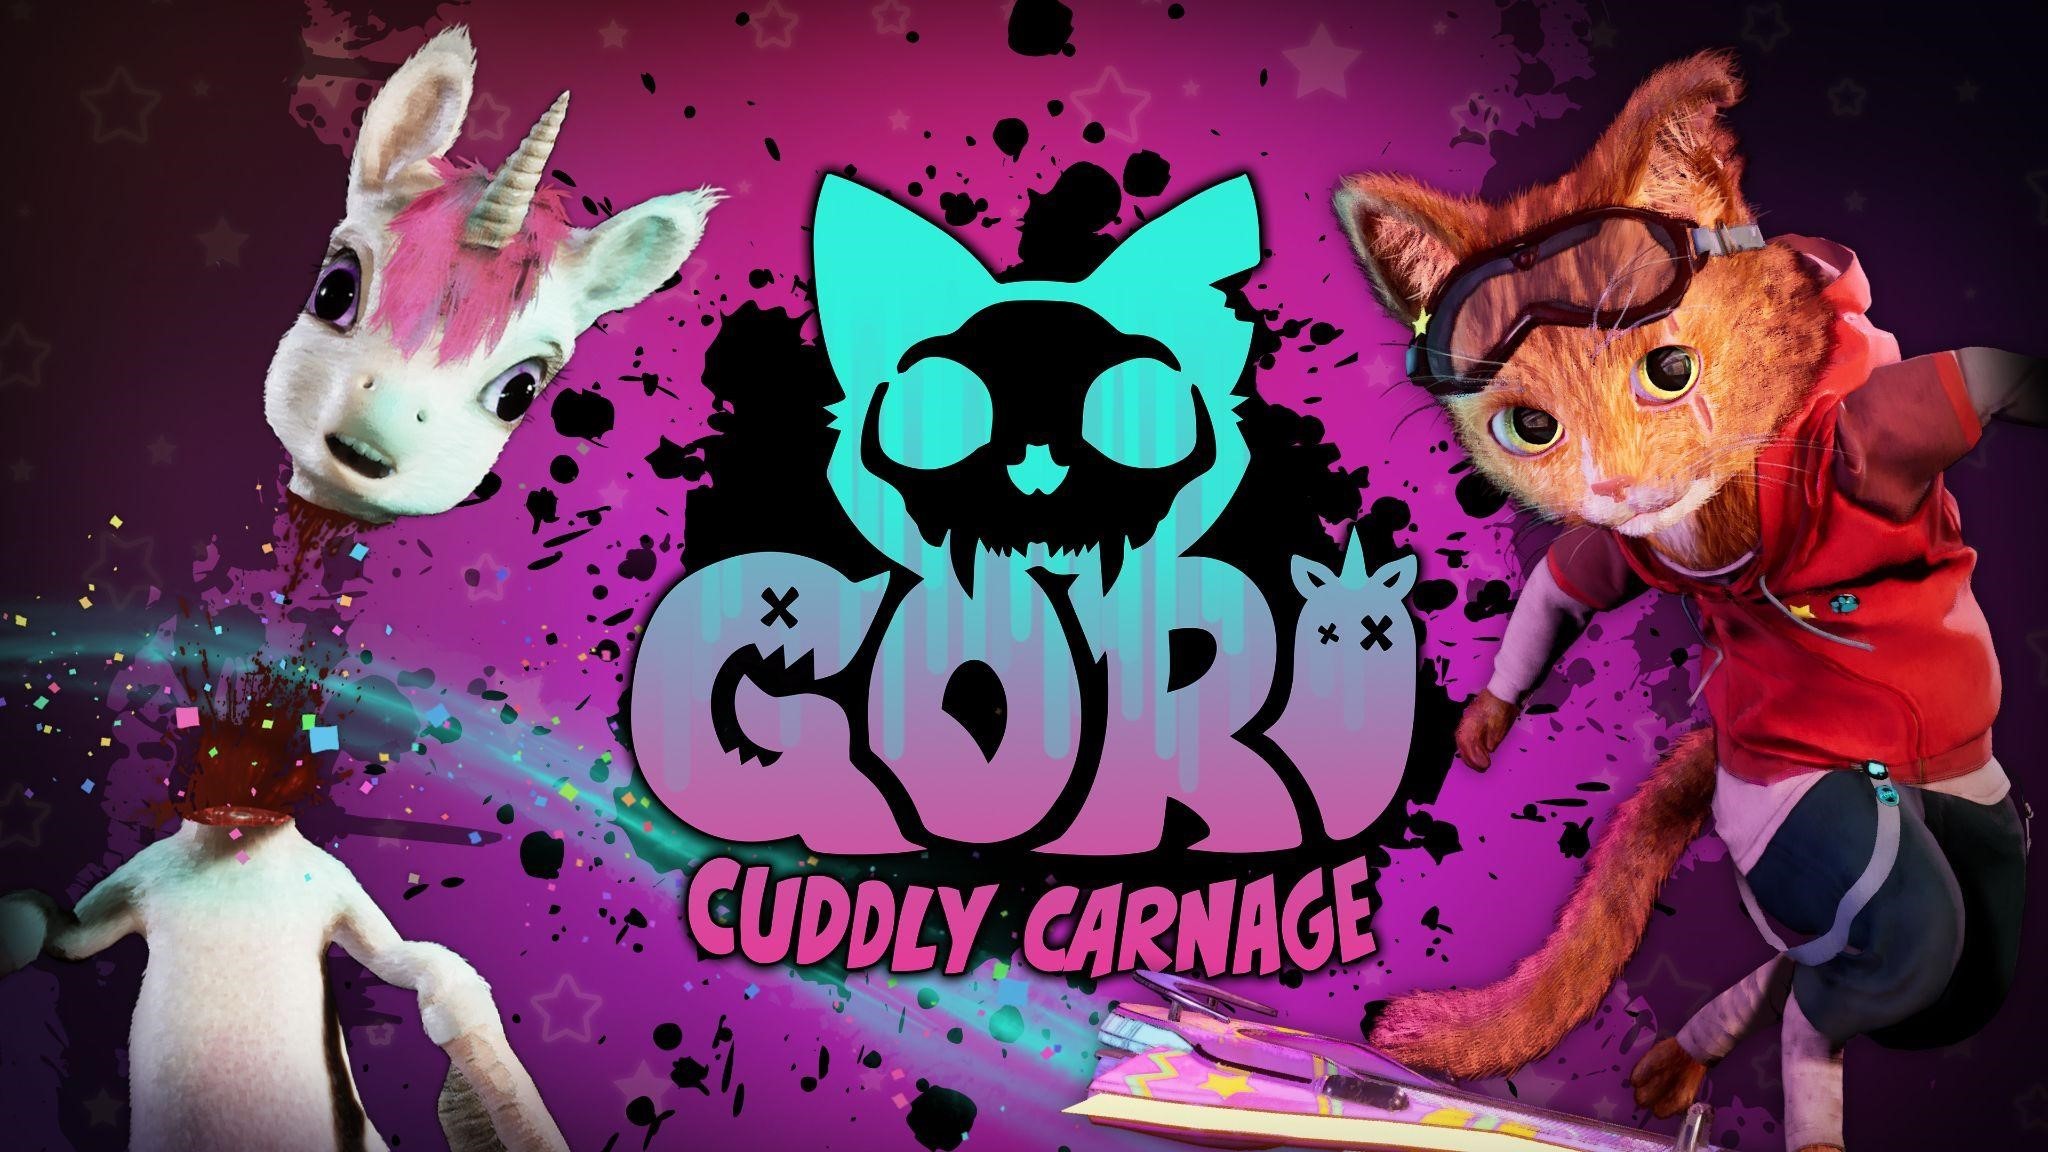 Wired Productions is publishing Gori: Cuddly Carnage, a dark humor murder-kitty game